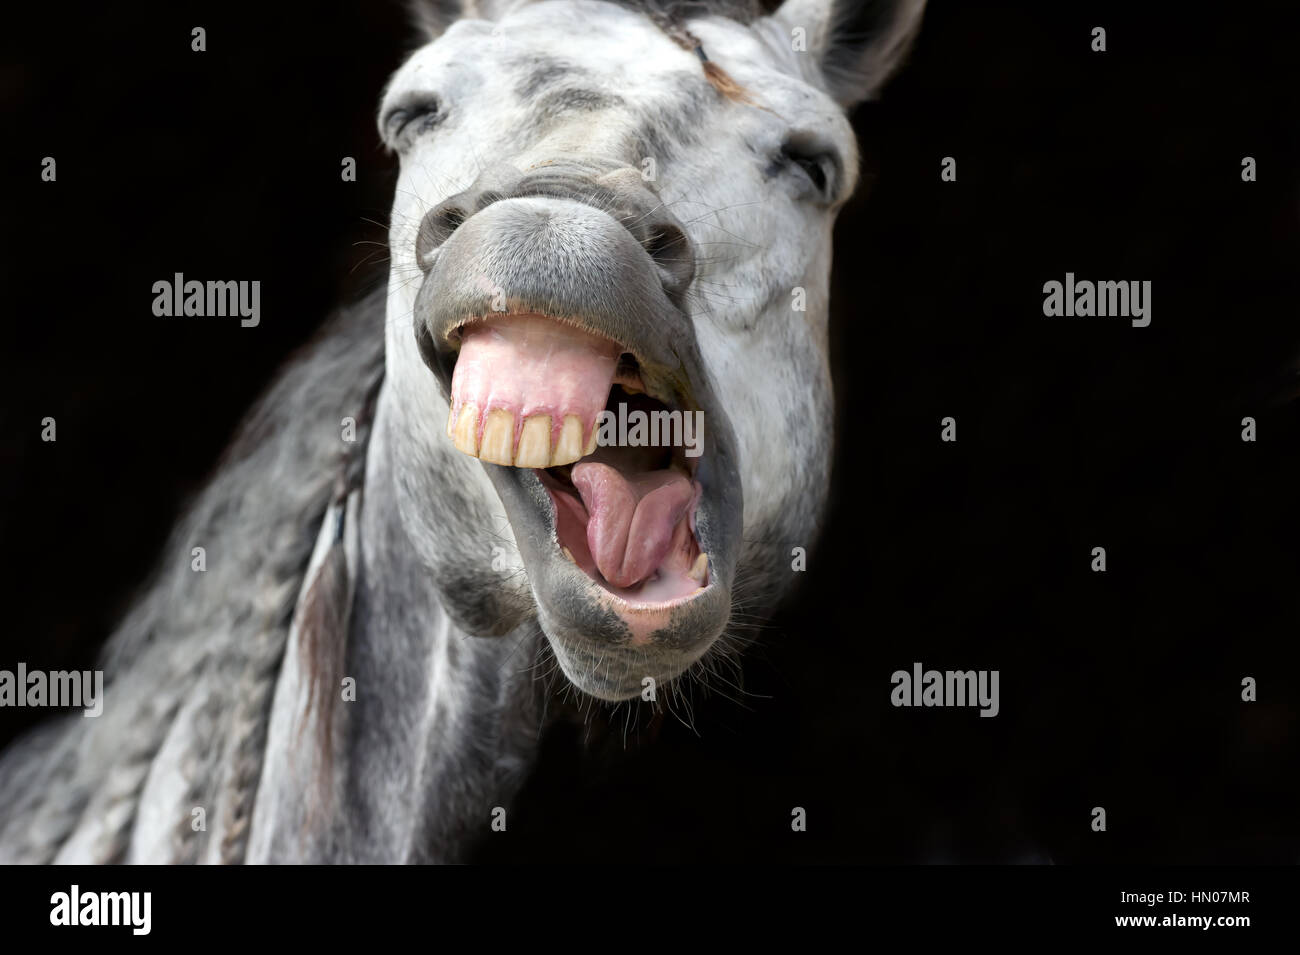 Funny animal is a white horse laughing his funny face off. Stock Photo